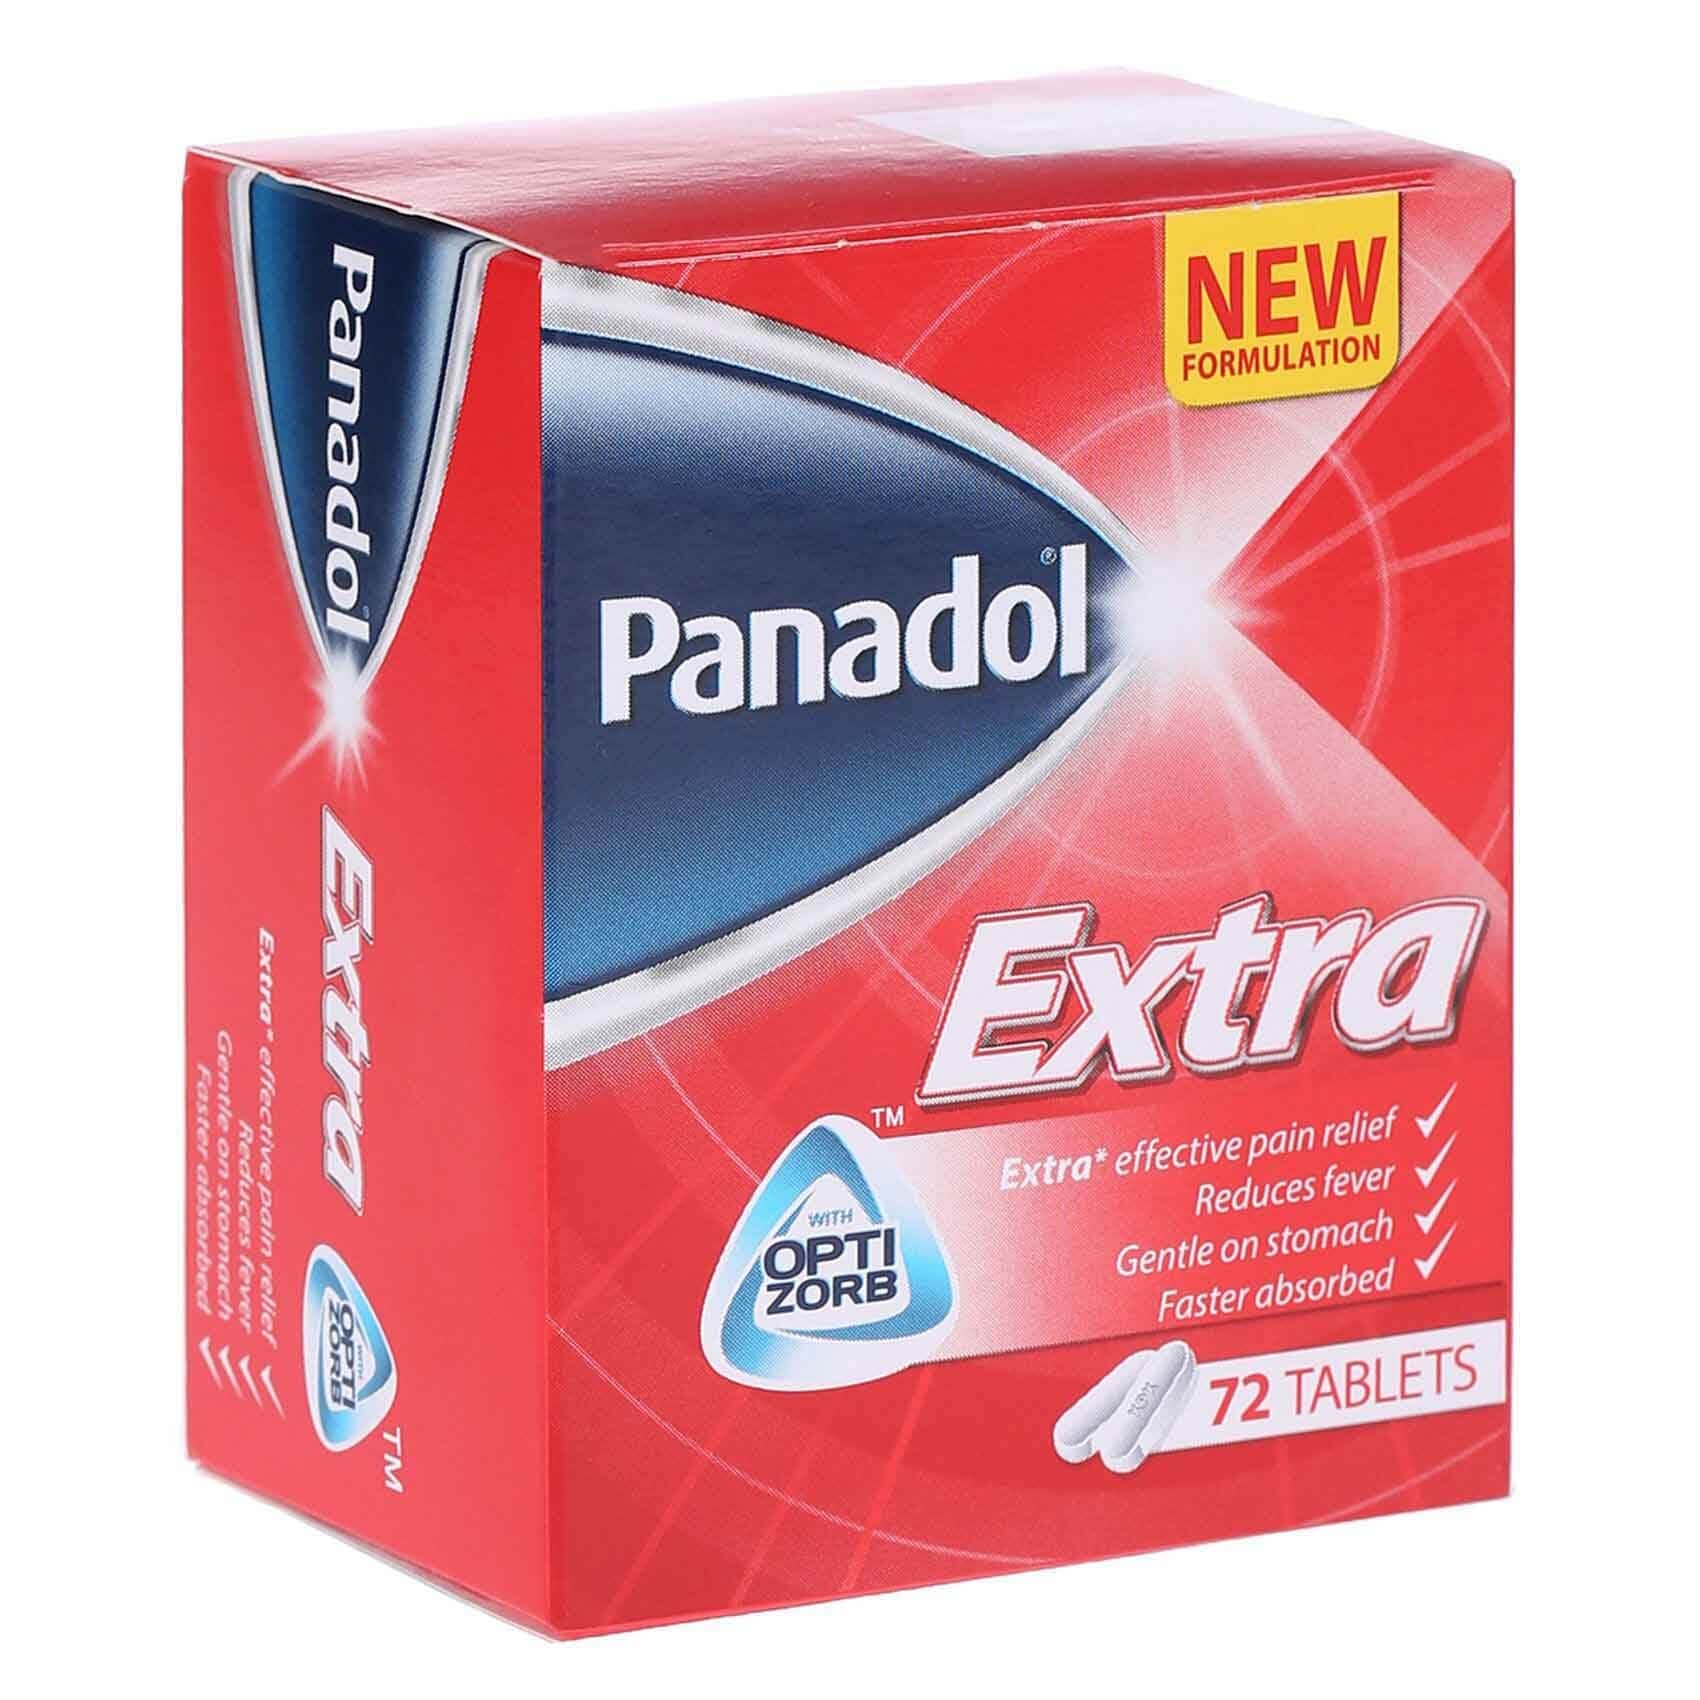 Buy Panadol Extra With Optizorb Pain Relief Tablets 72 Count Online